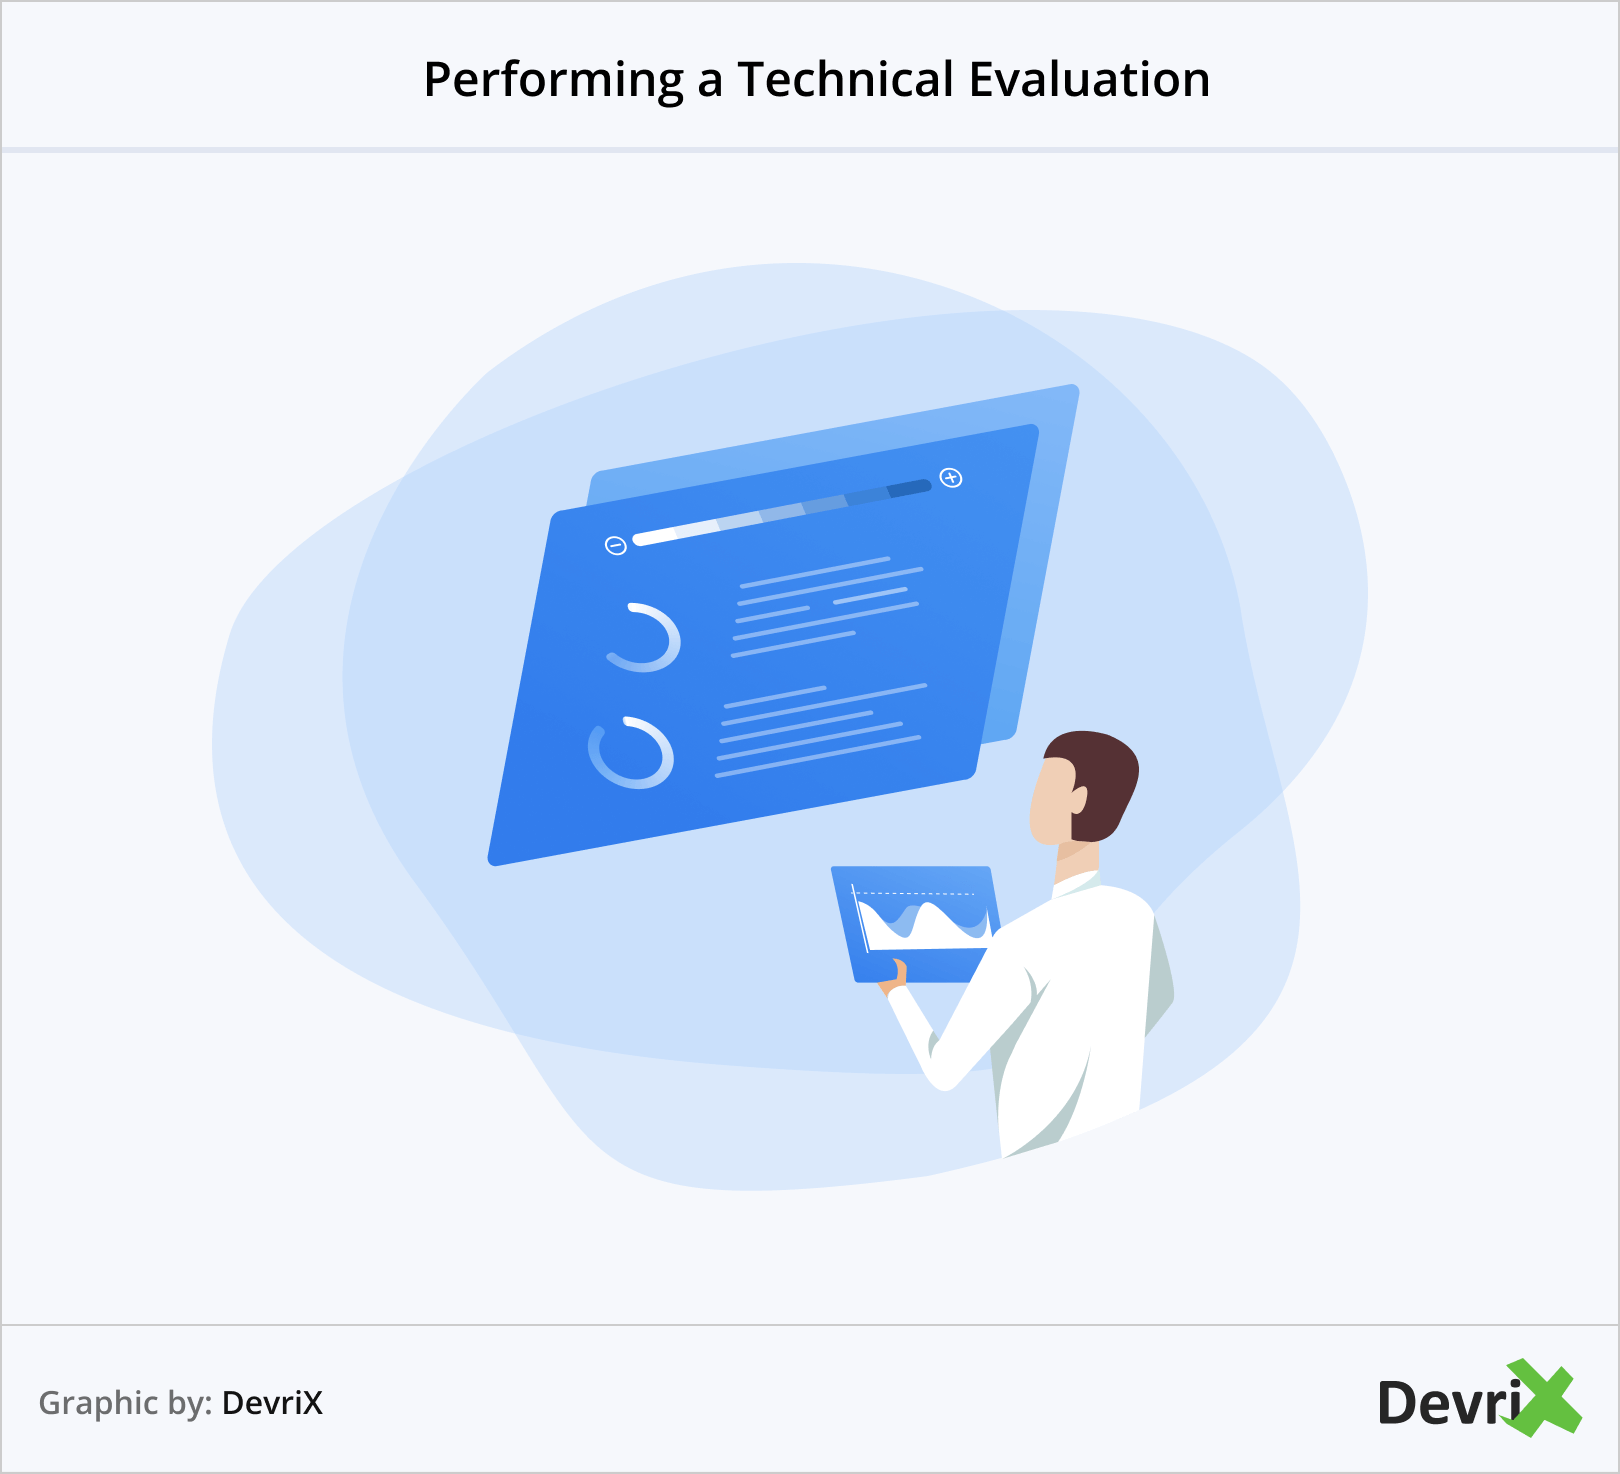 Performing a Technical Evaluation